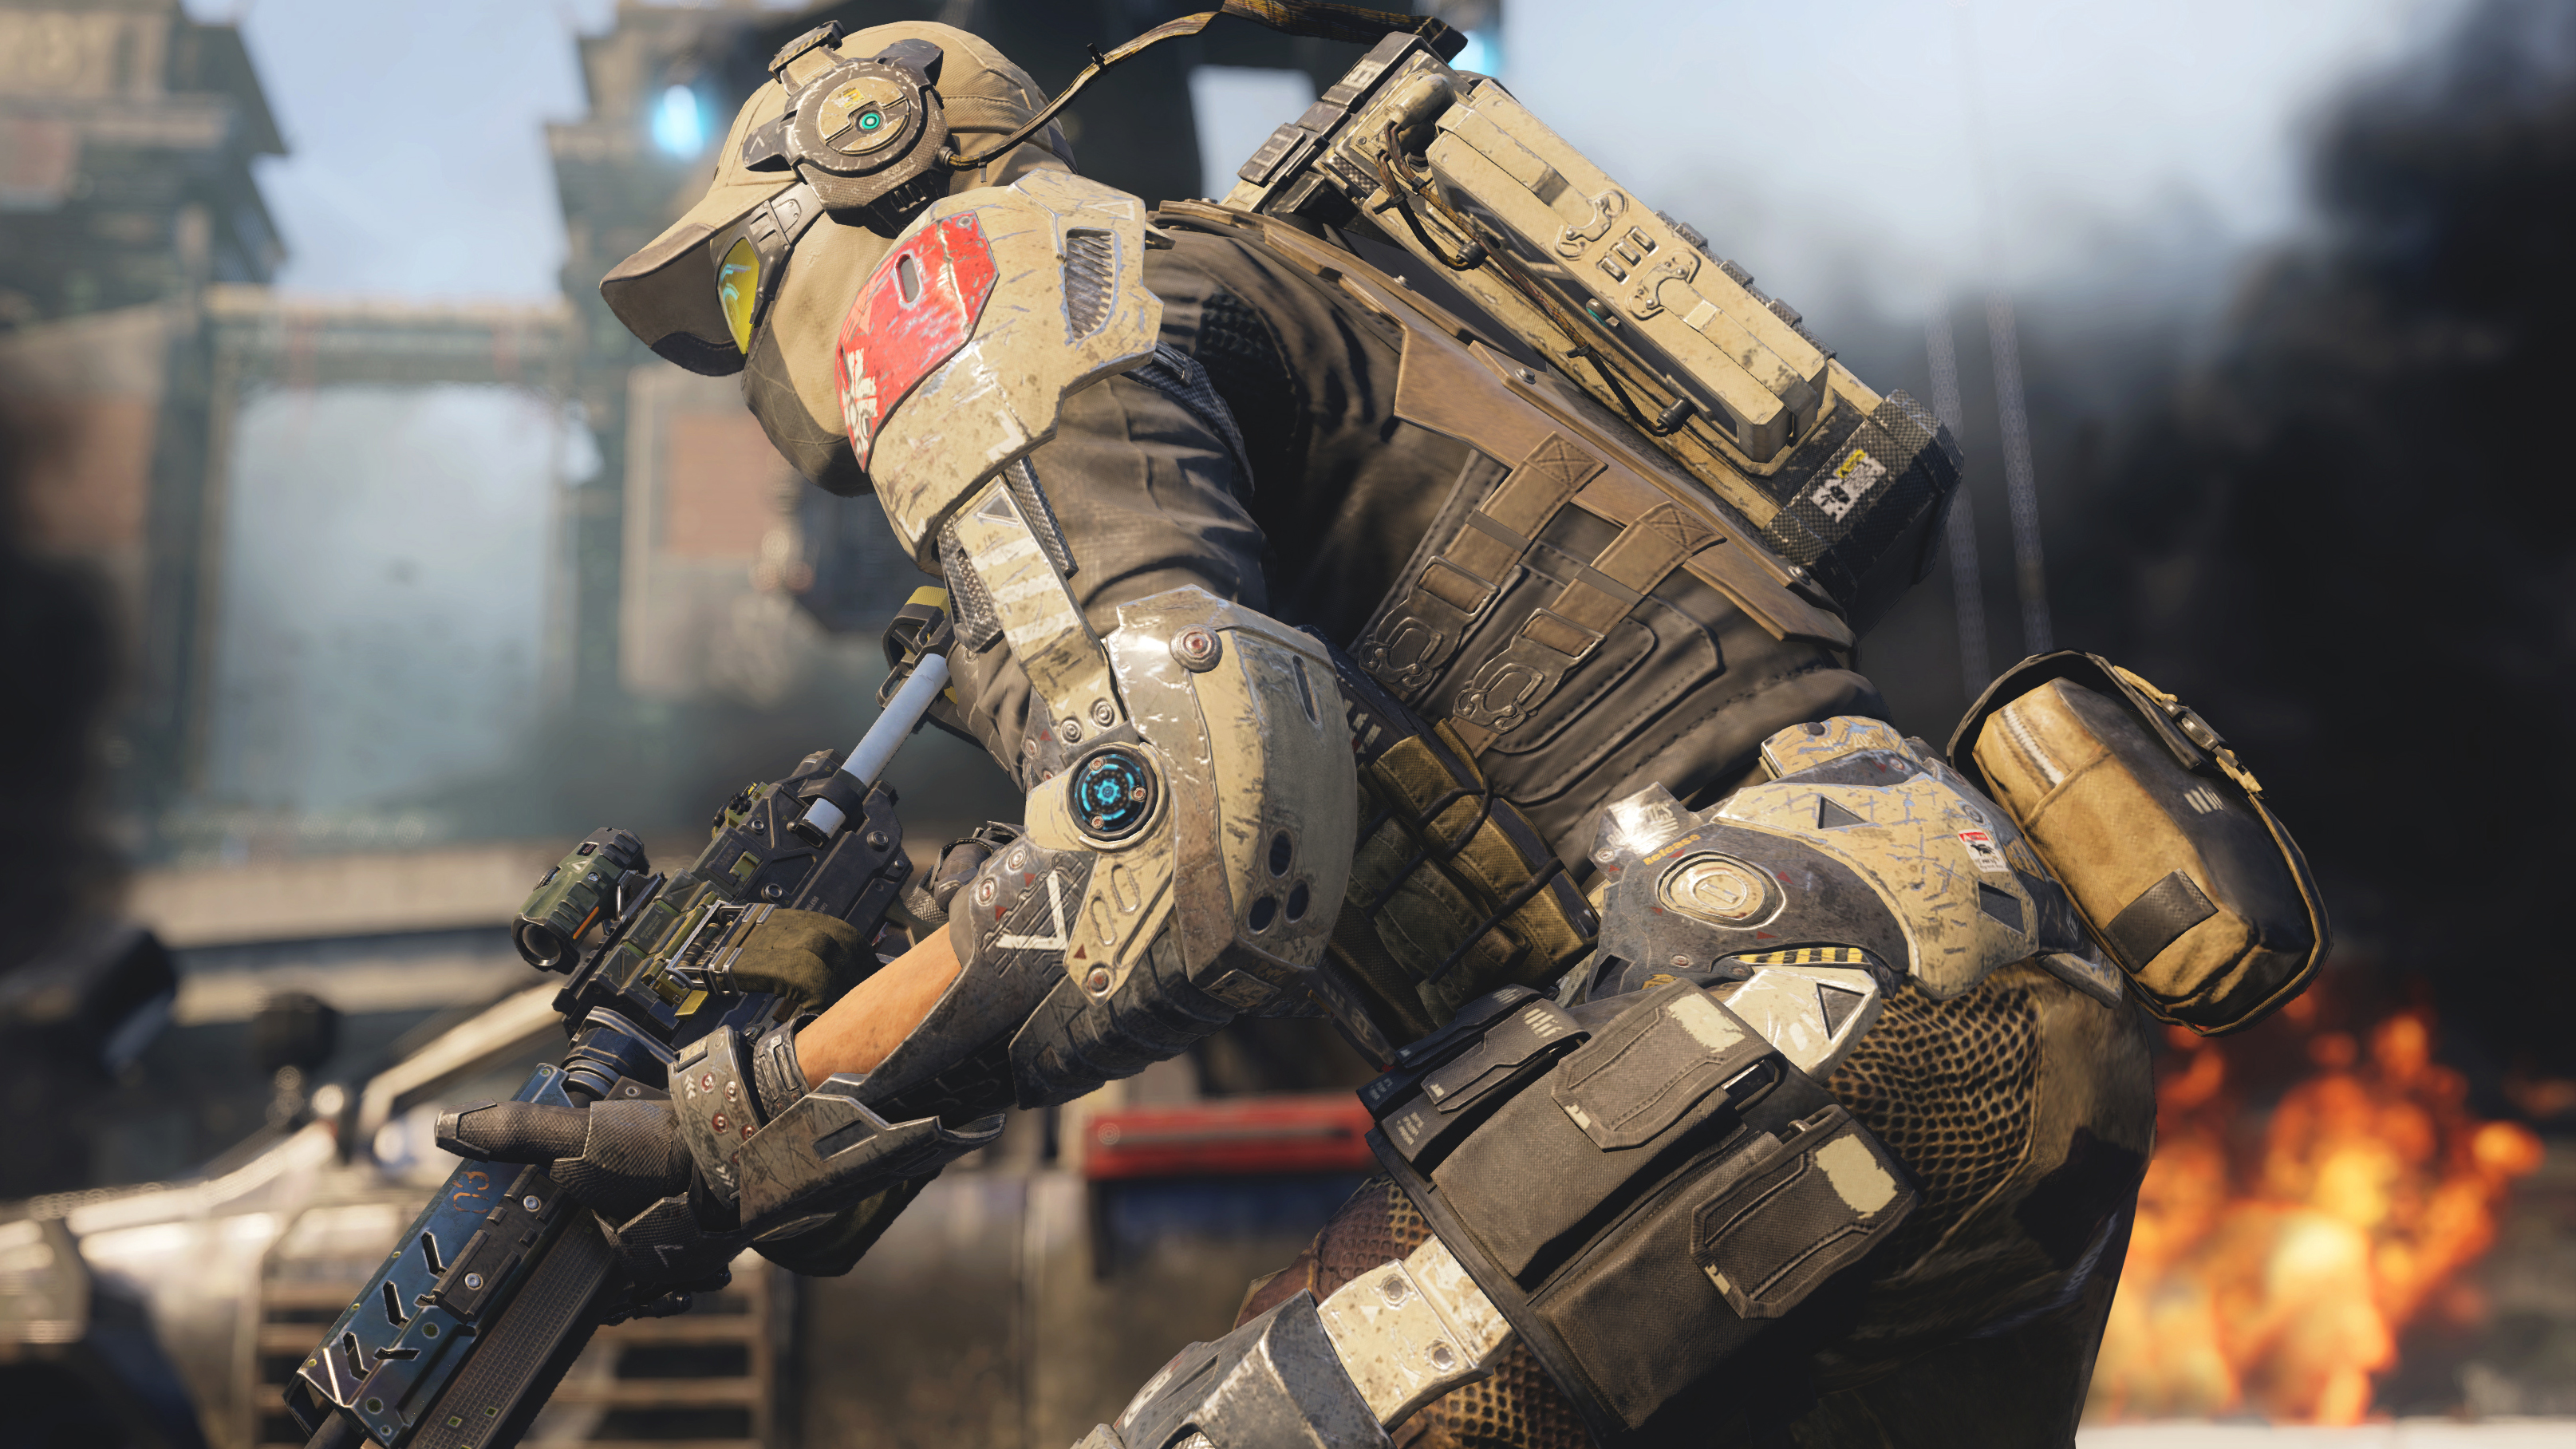 New Call of Duty everything we know so far about Call of Duty 2020